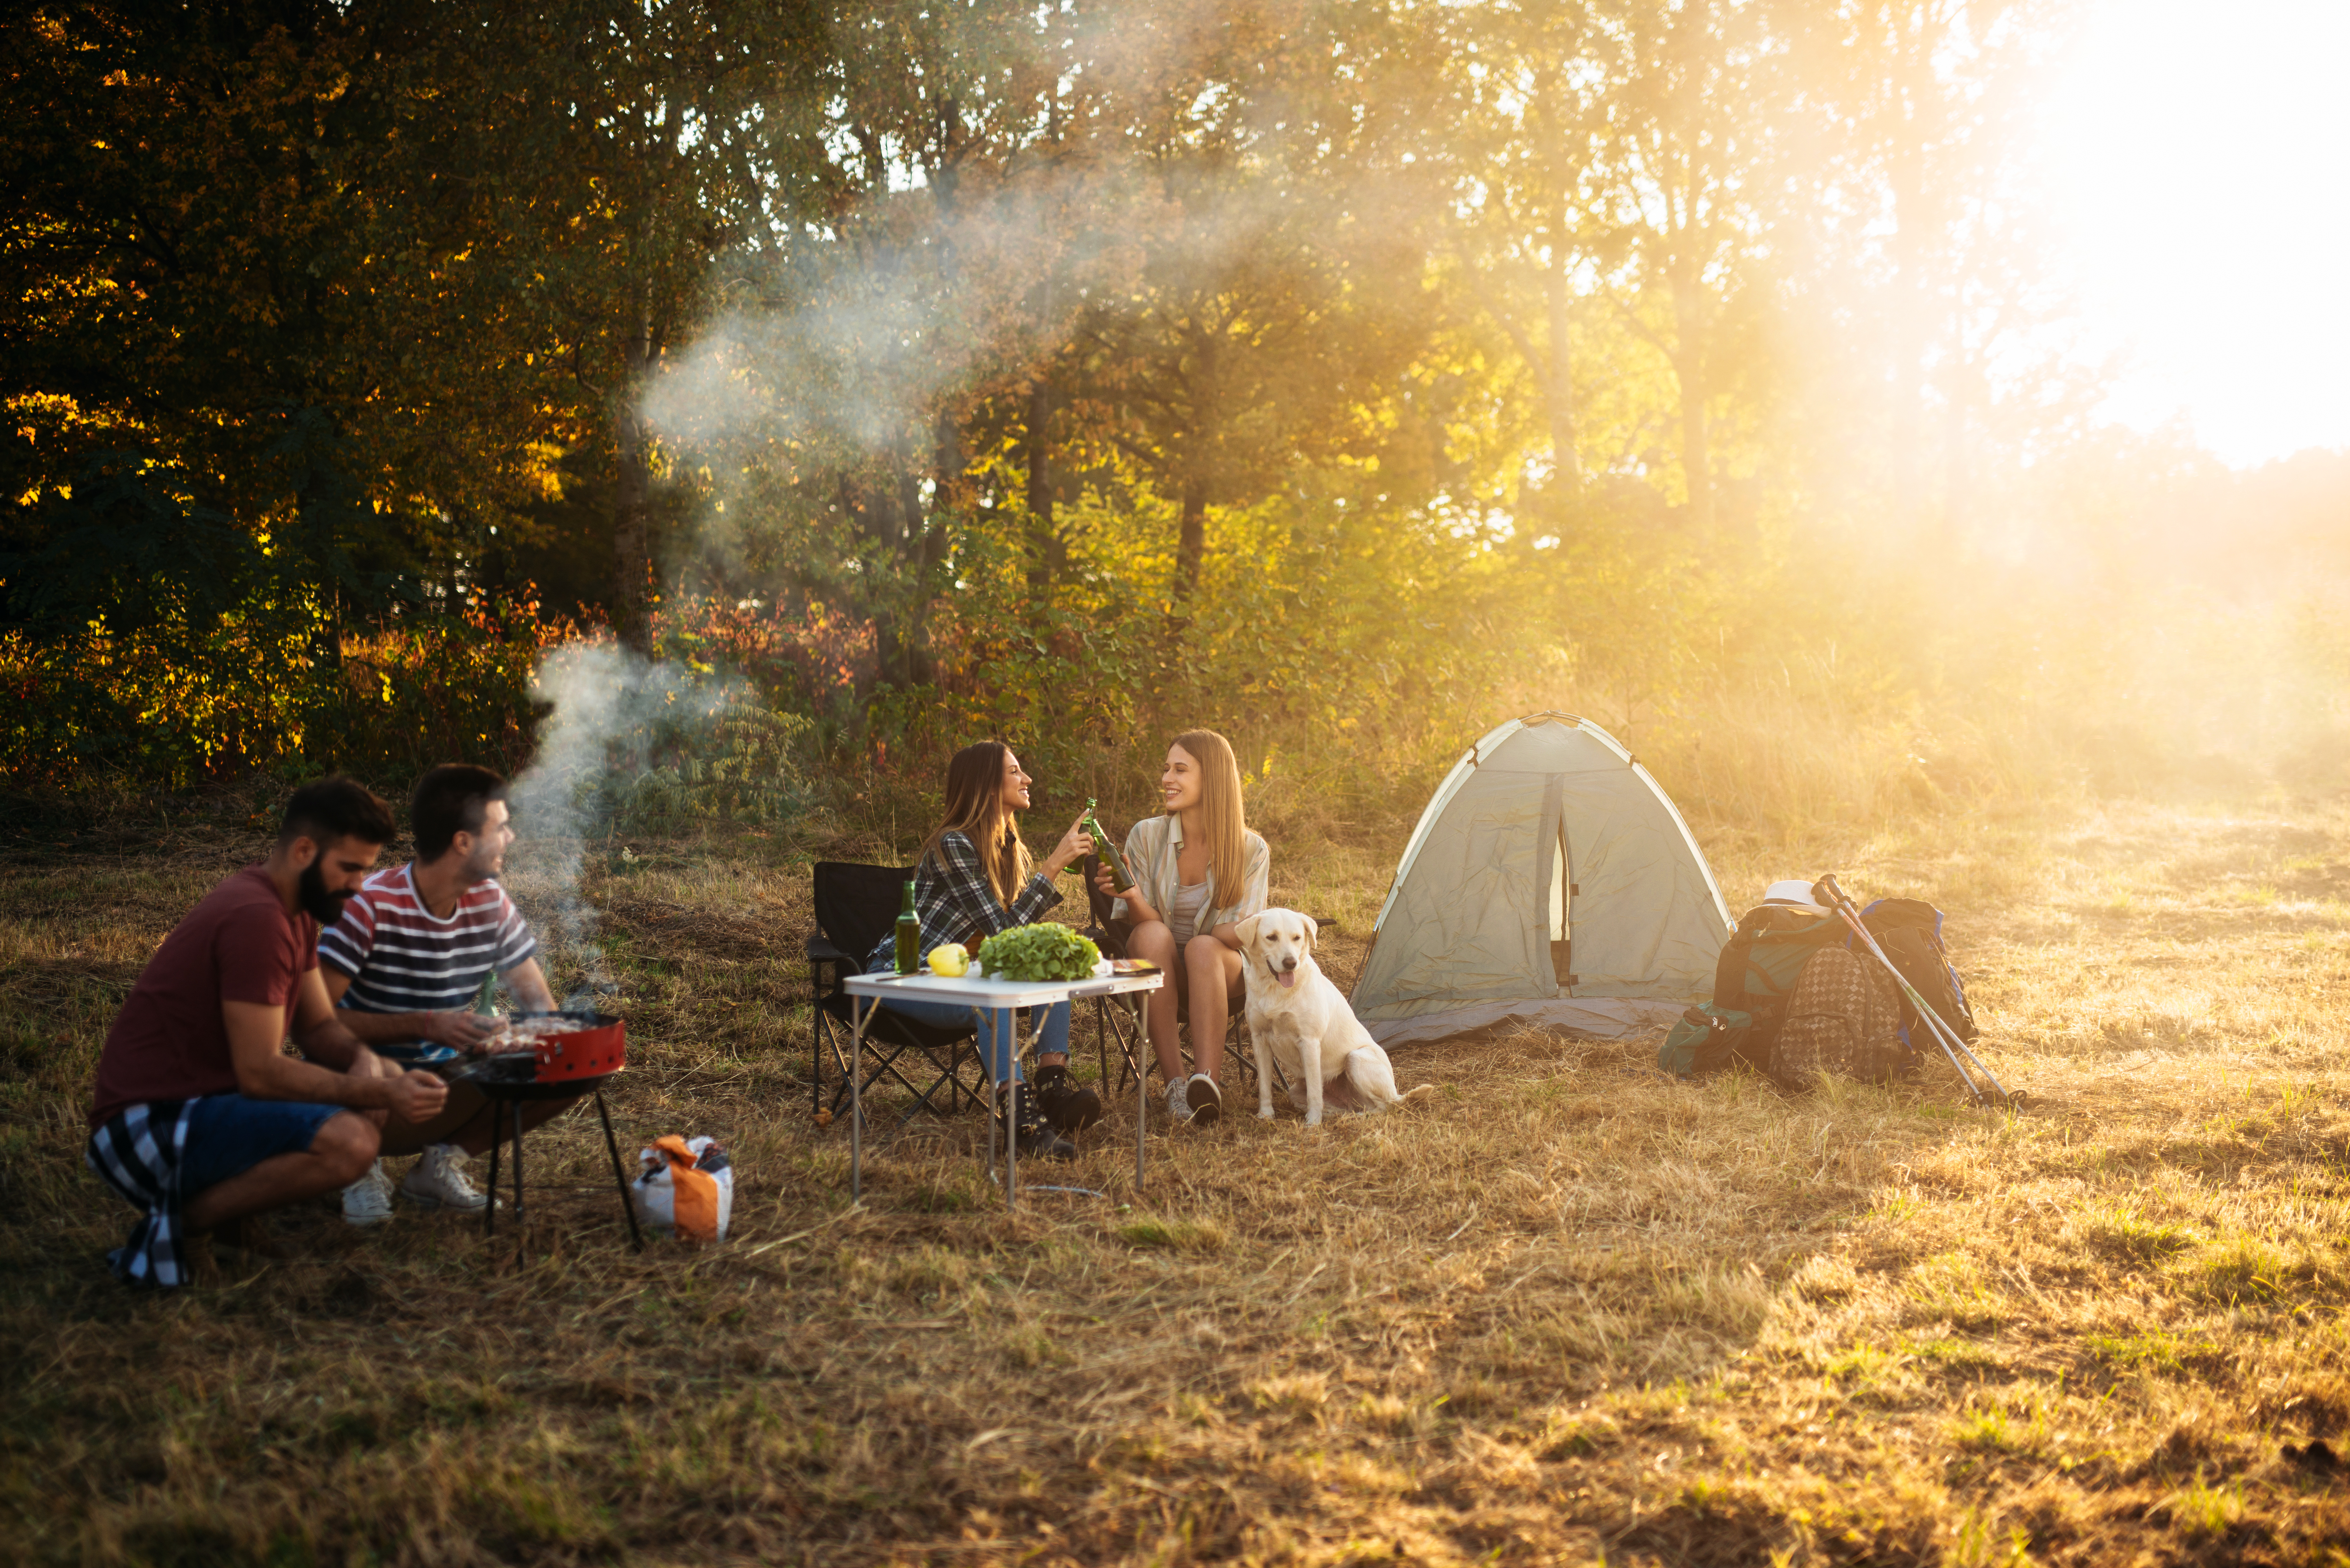 Camping 101: Tips For Avoiding Mosquitoes & Ticks - Featured Image